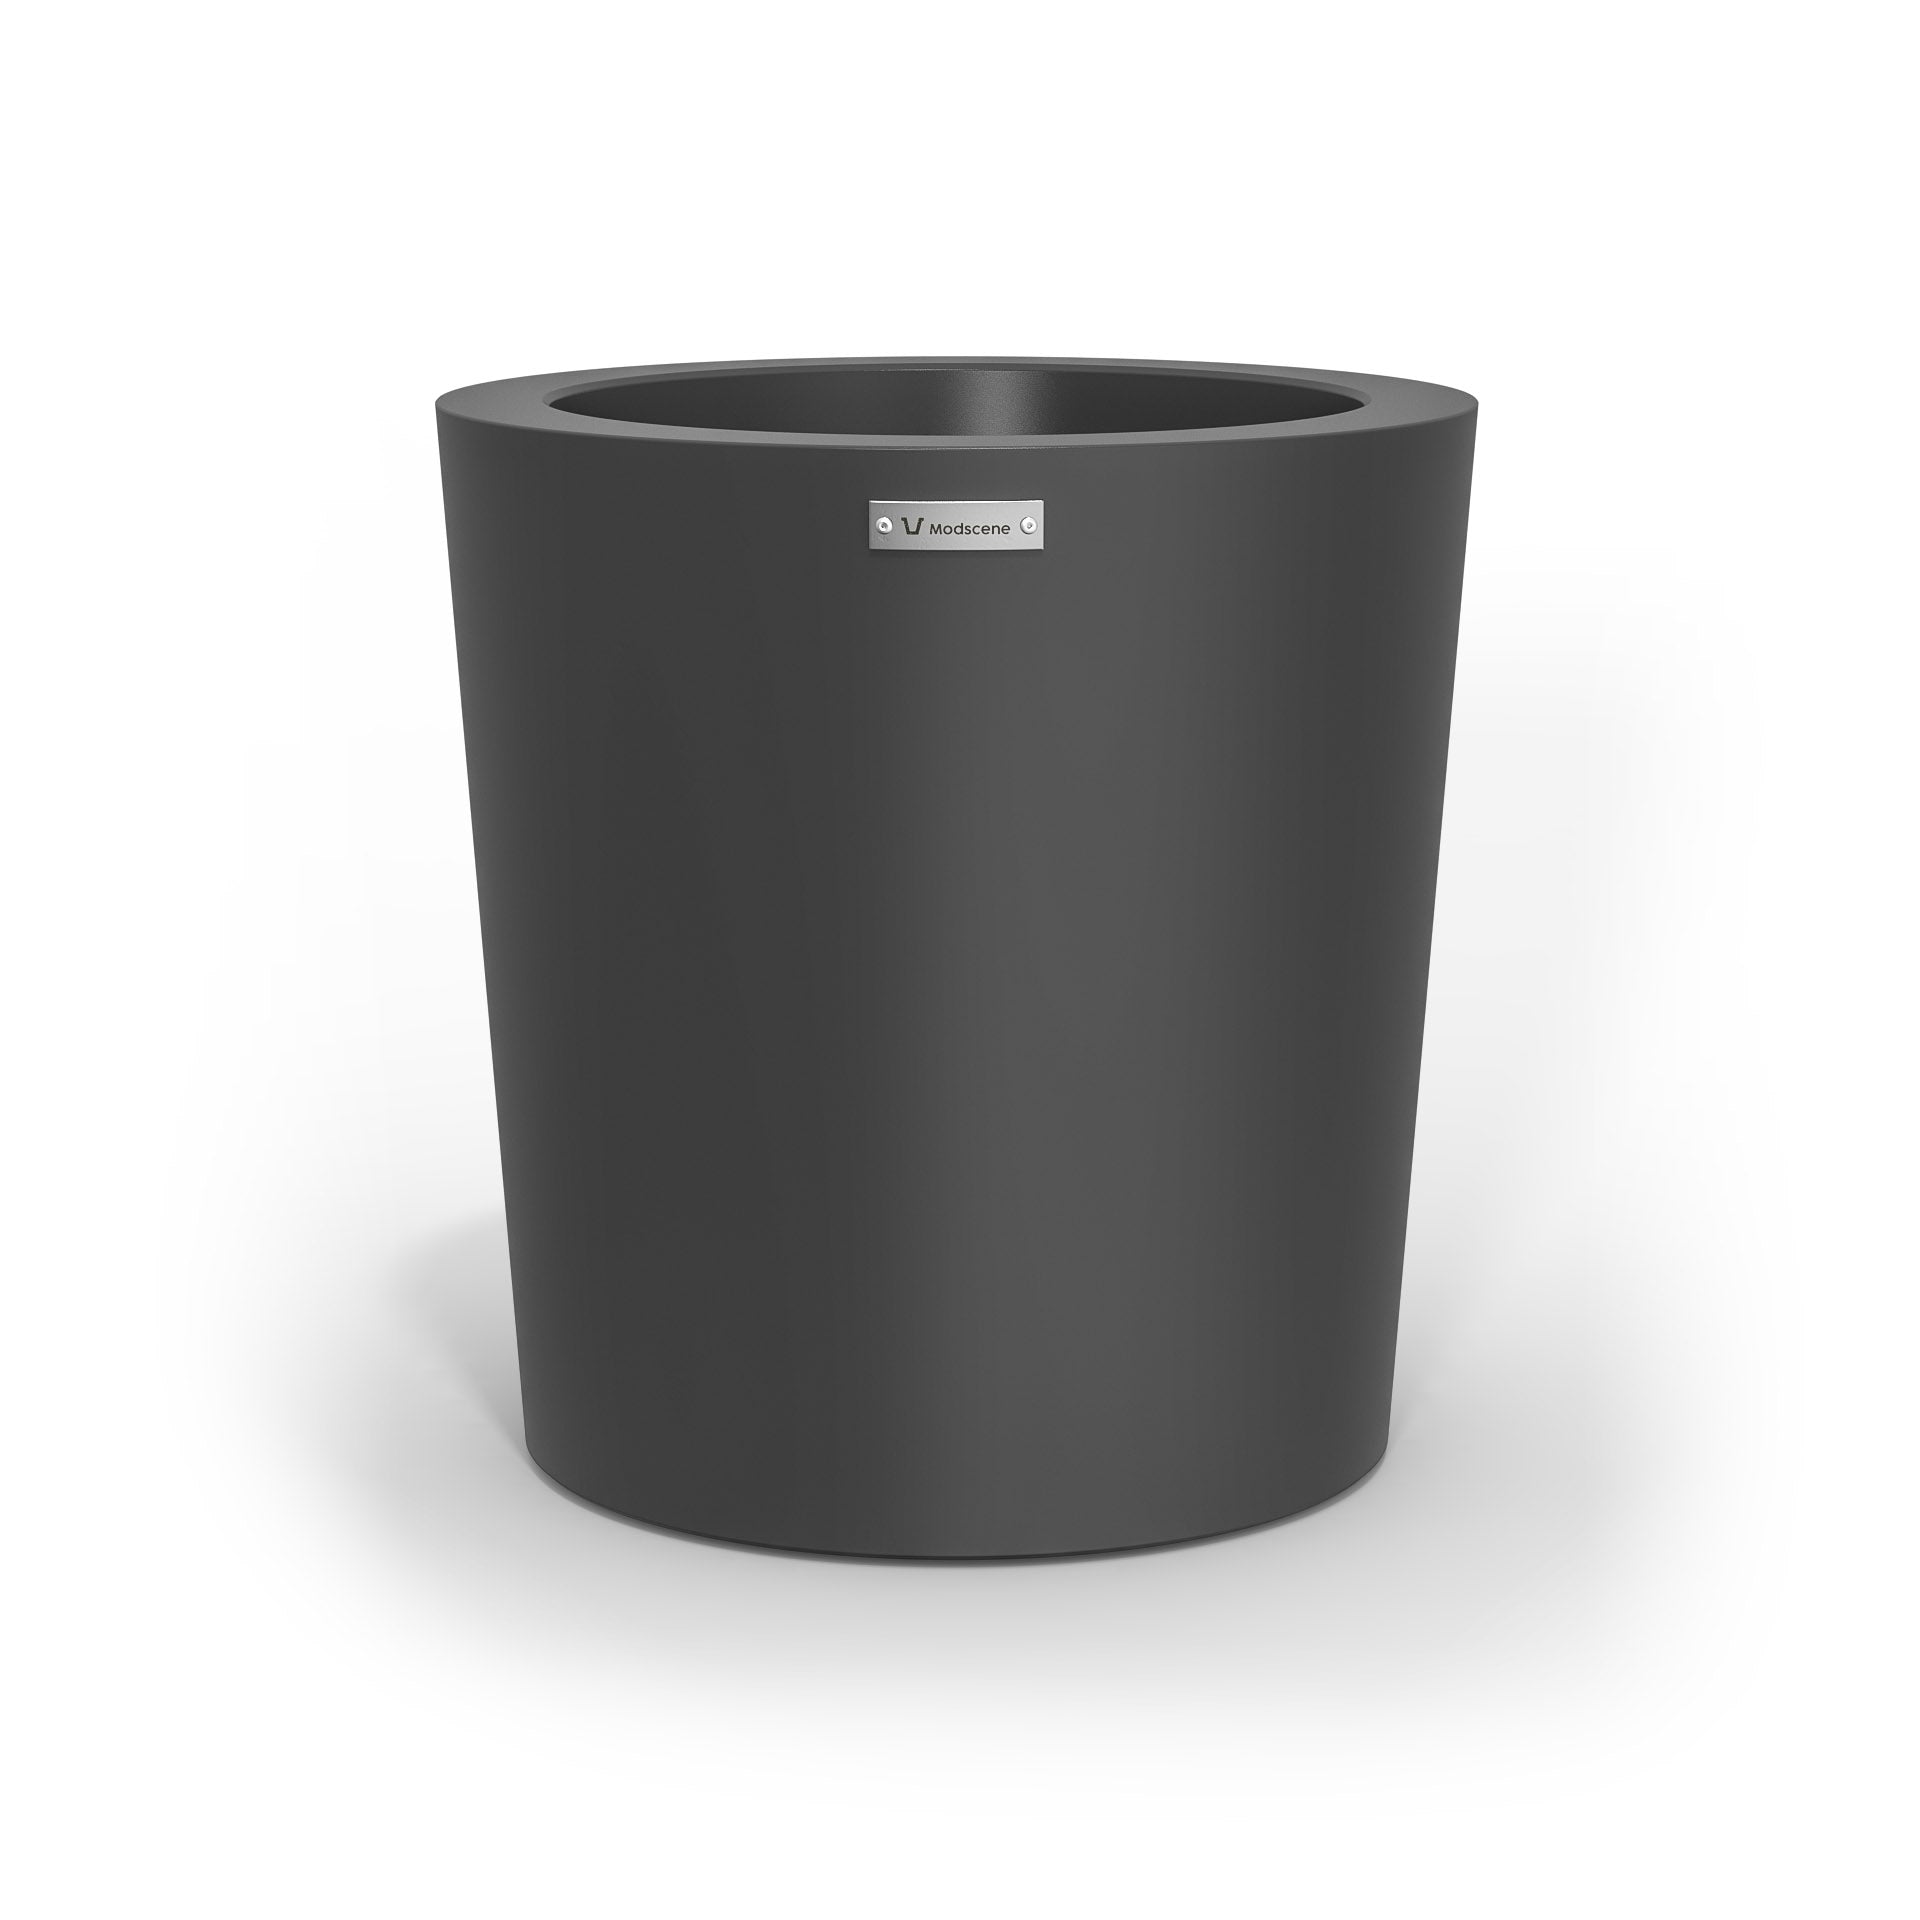 A small planter pot made by Modscene NZ in a dark grey colour.